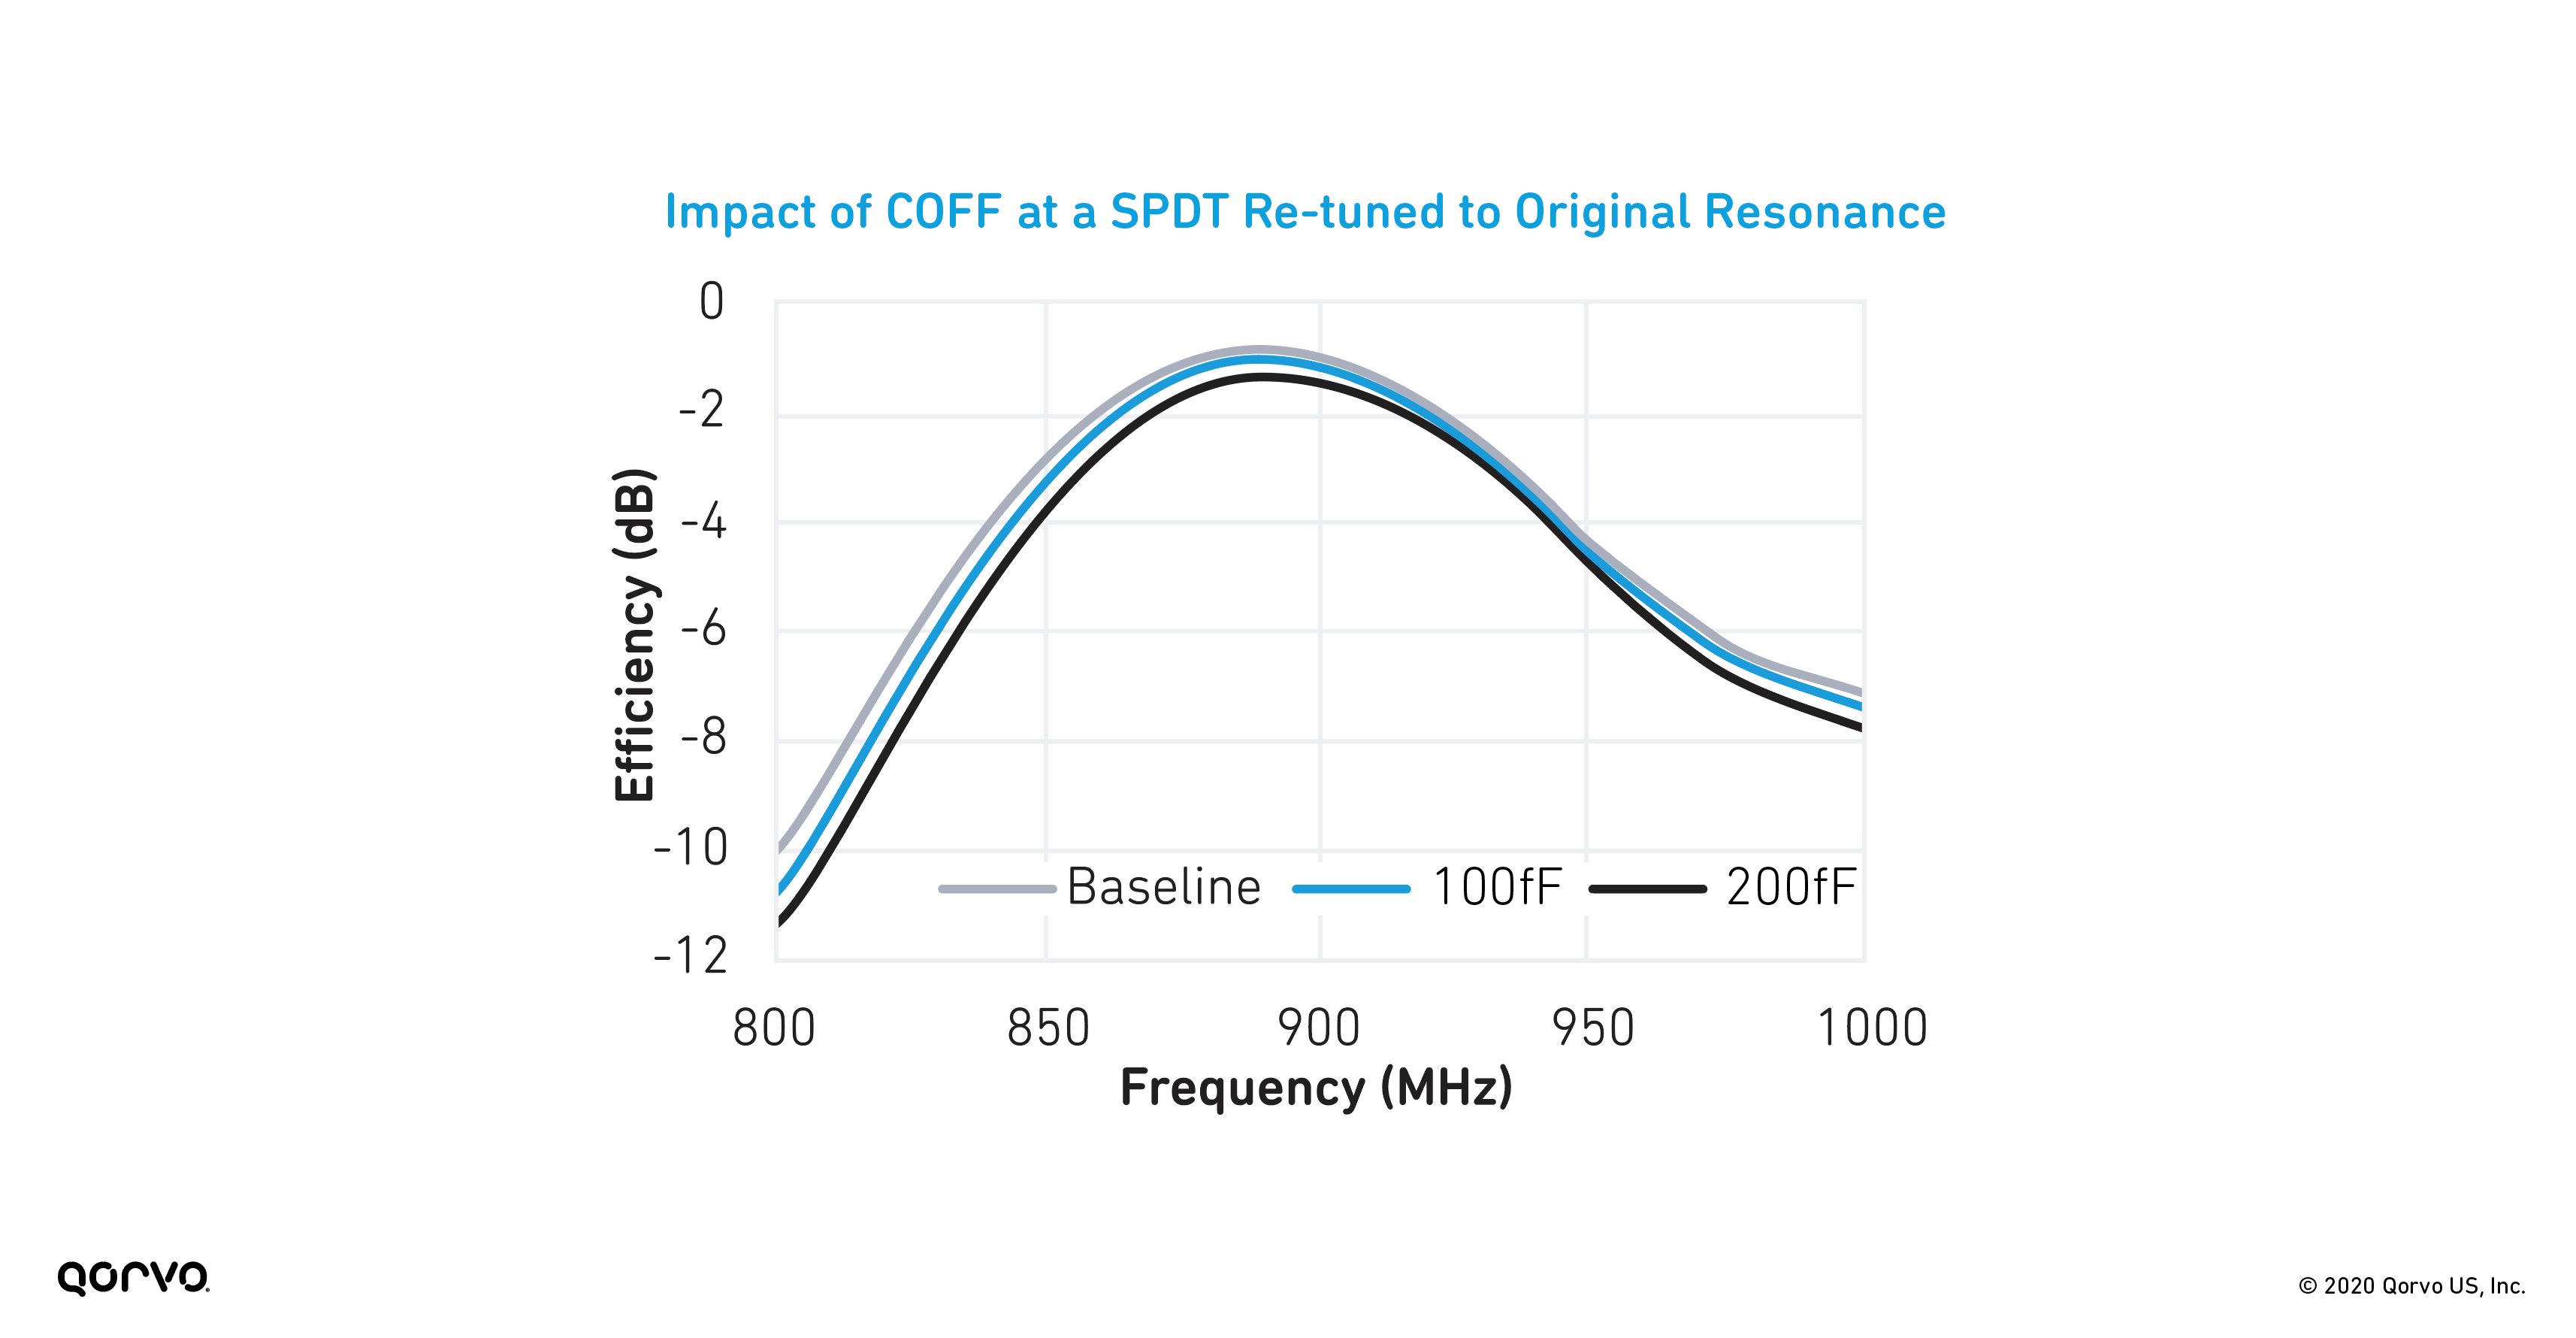 Graph of the Impact of COFF at a SPDT Re-tuned to Original Resonance